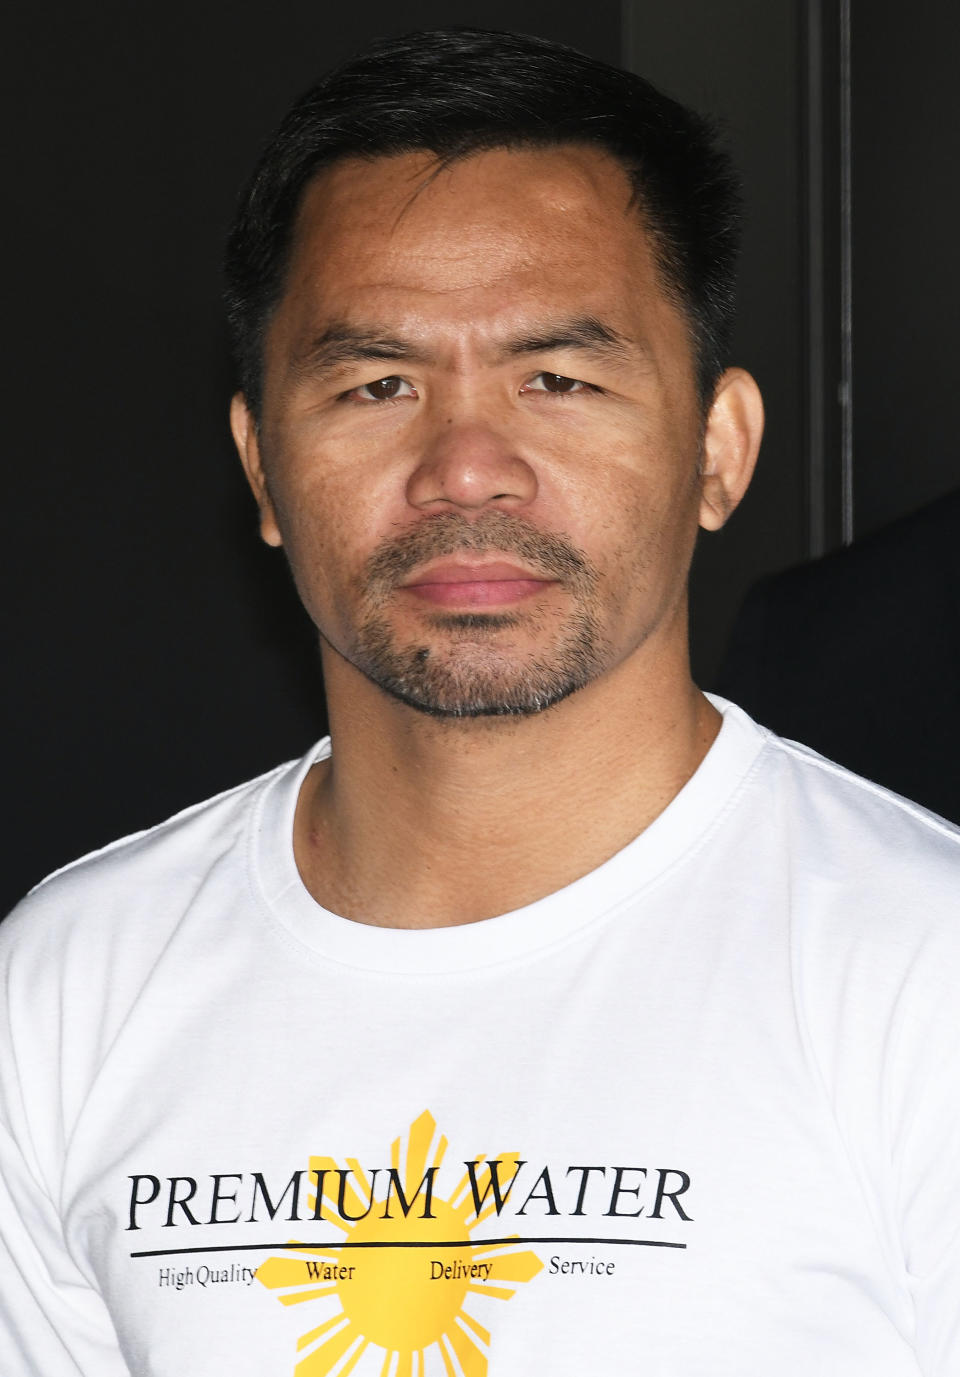 A close-up of Manny wearing a t-shirt that says "Premium Water"